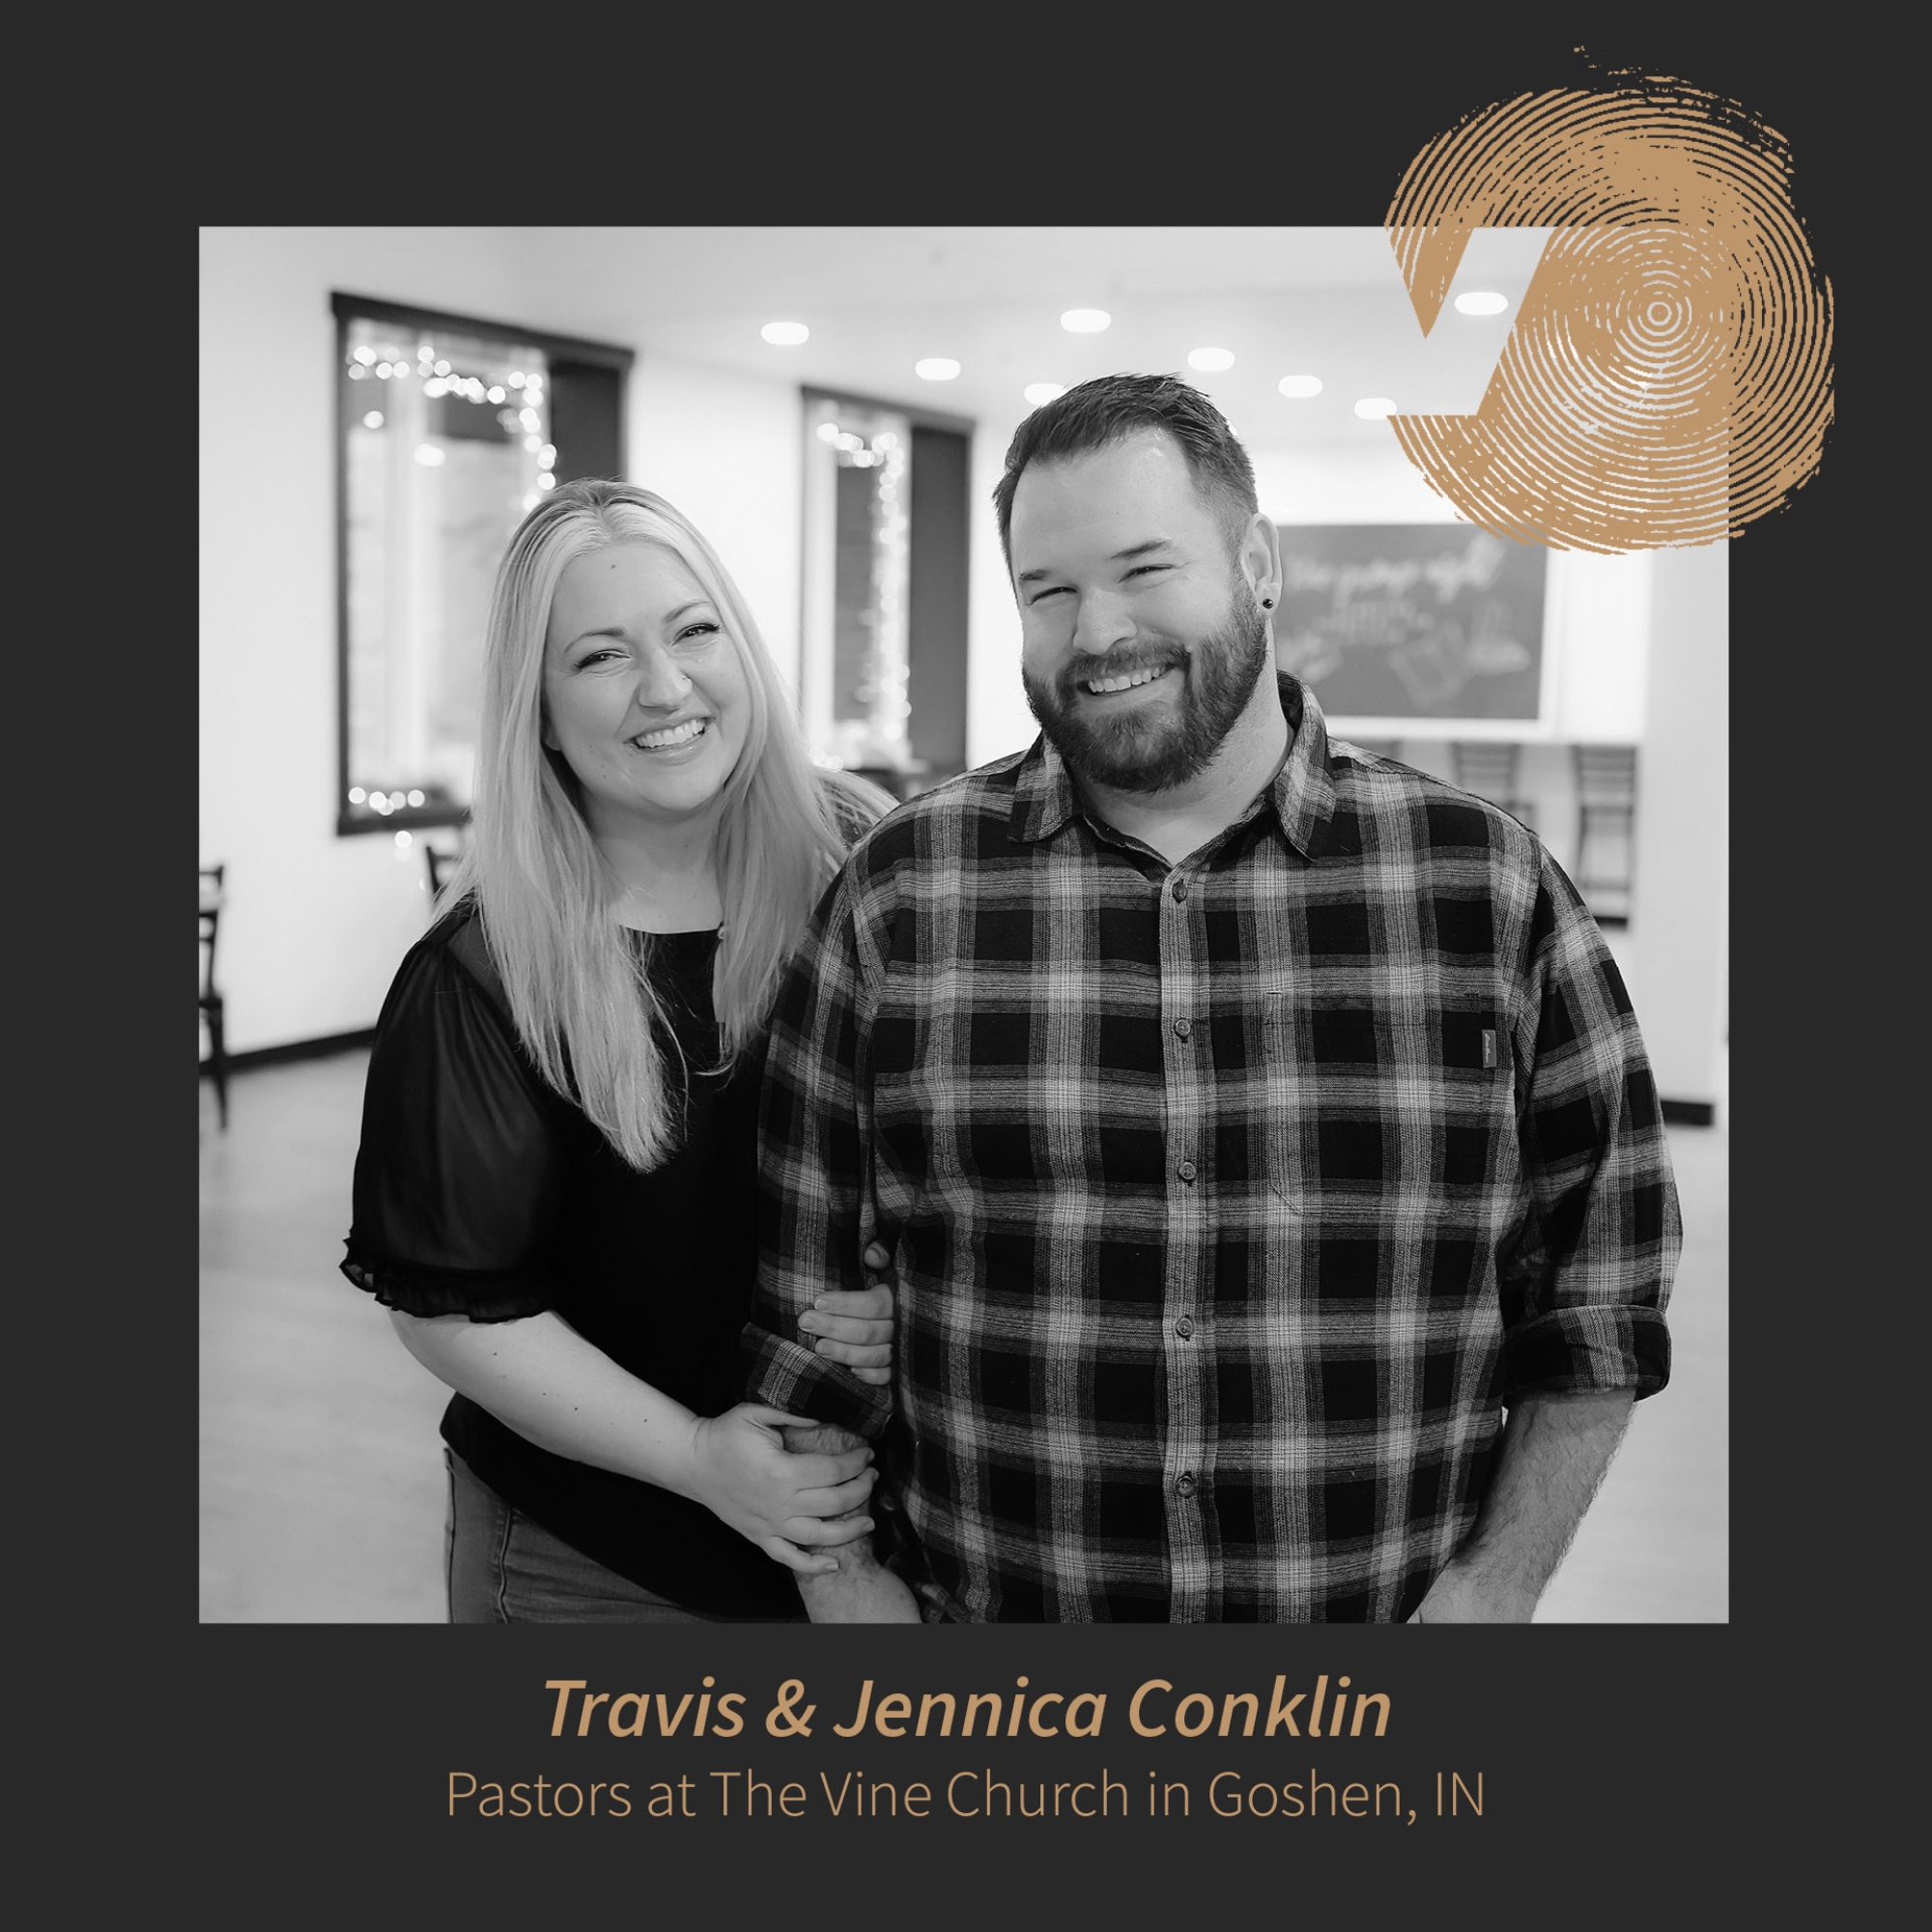 We Are Vineyard Church Story: Travis and Jennica Conklin - The Vine Church -  Goshen, IN